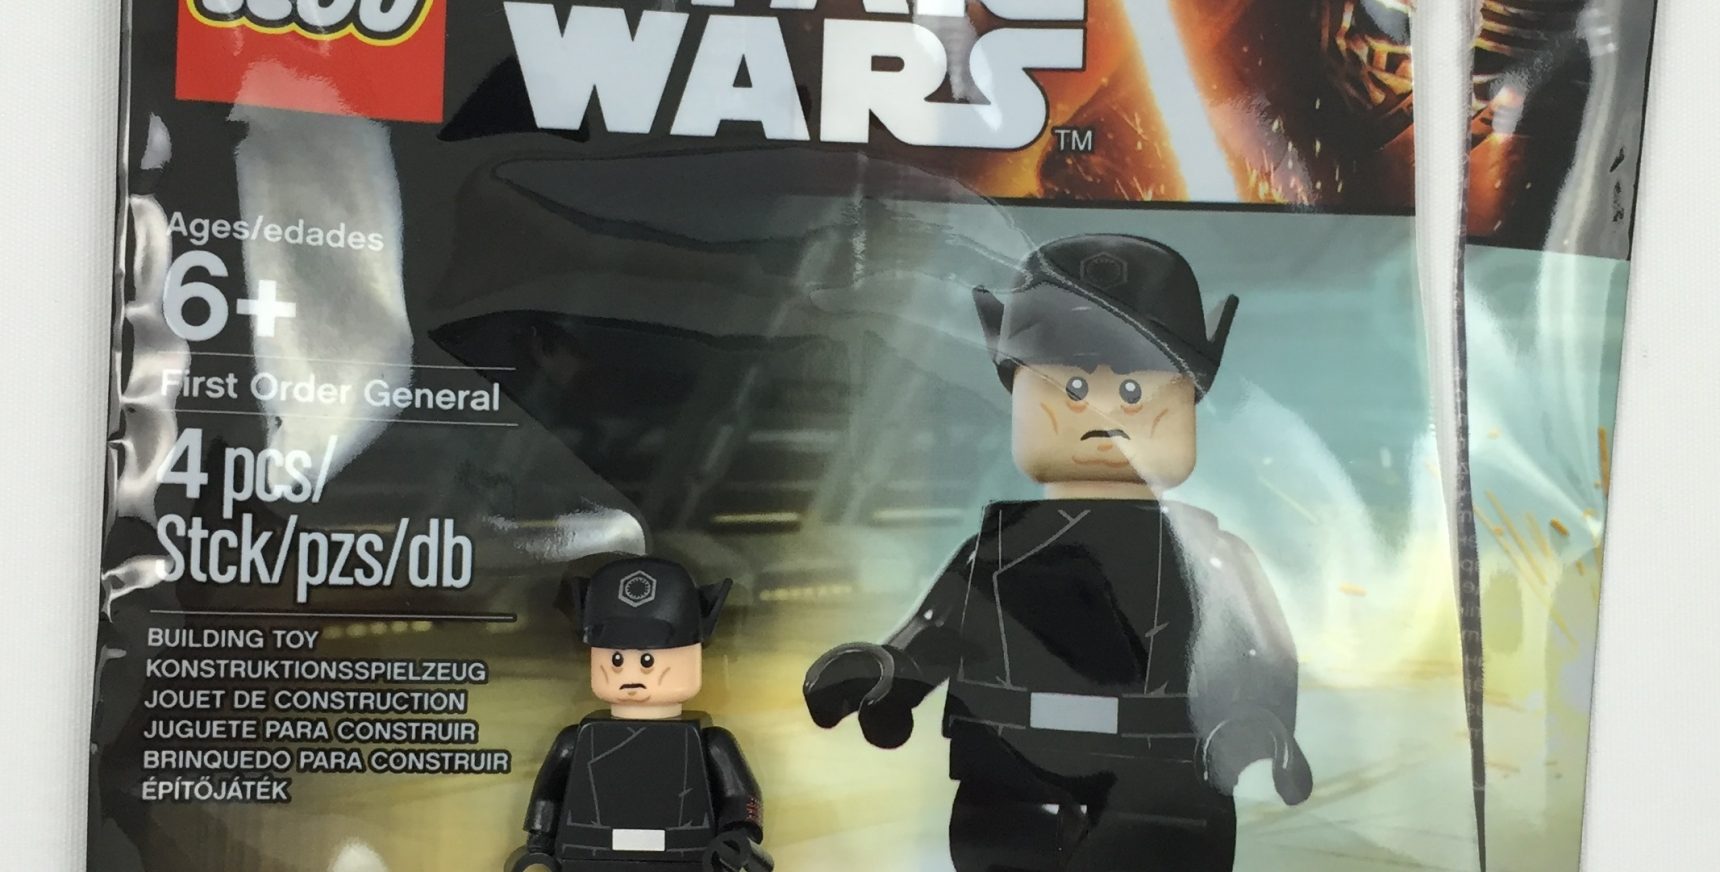 LEGO First Order General (5004406) – Unboxing & Review